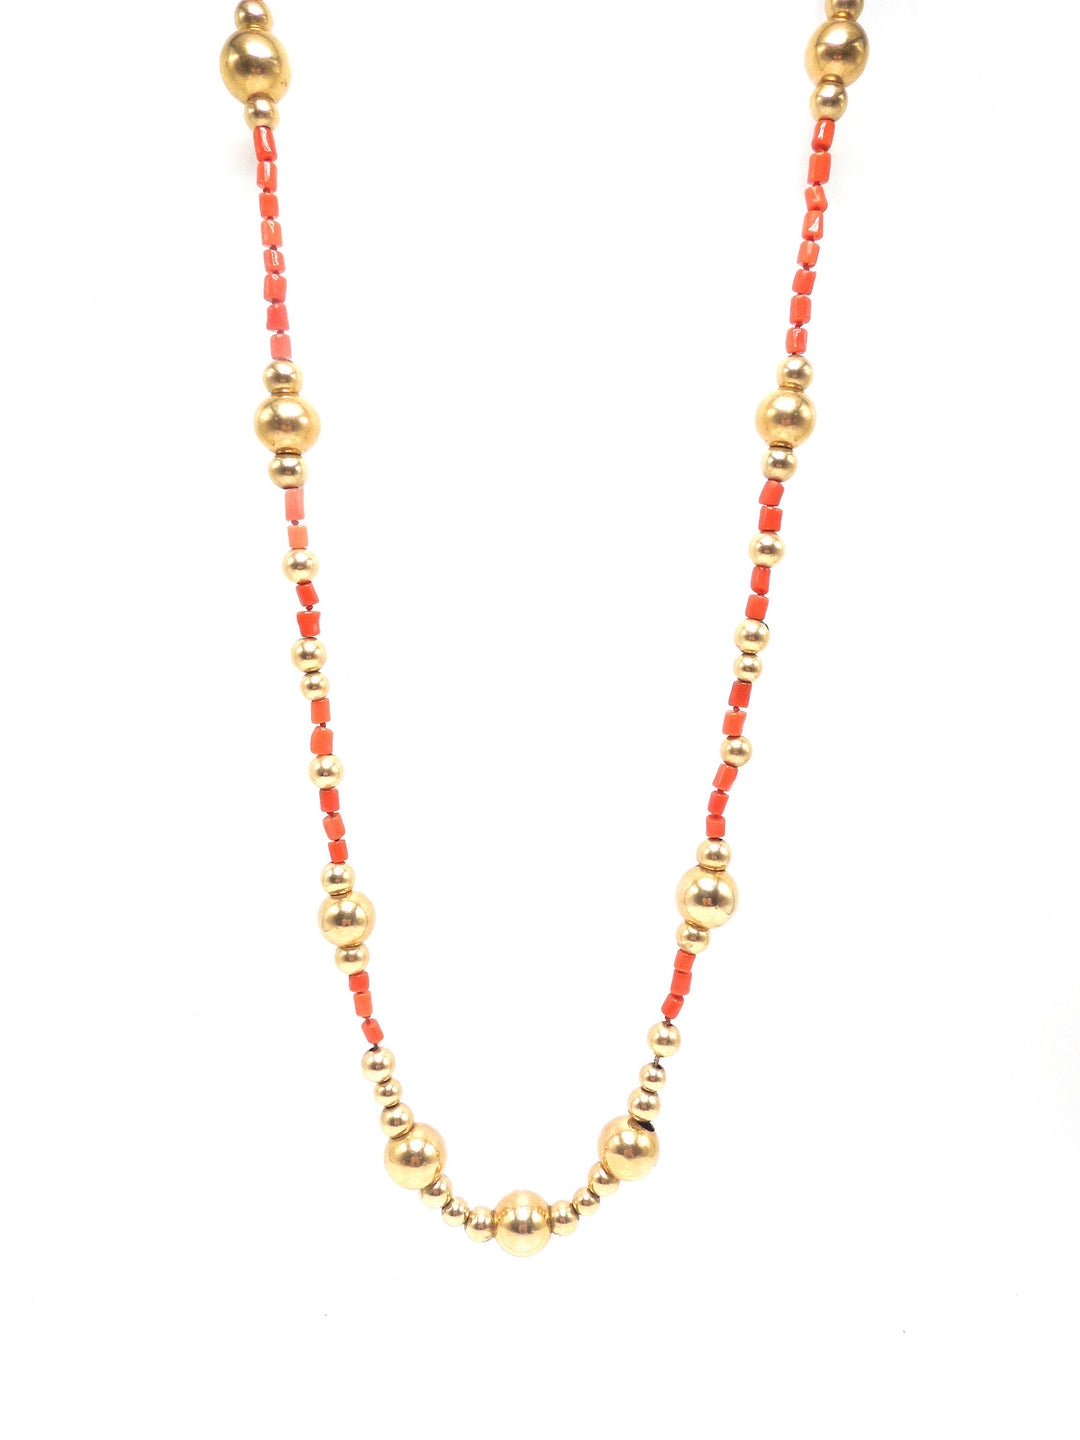 Vintage 14K Yellow Gold and Coral Bead Necklace - 36-inch Long Single Strand